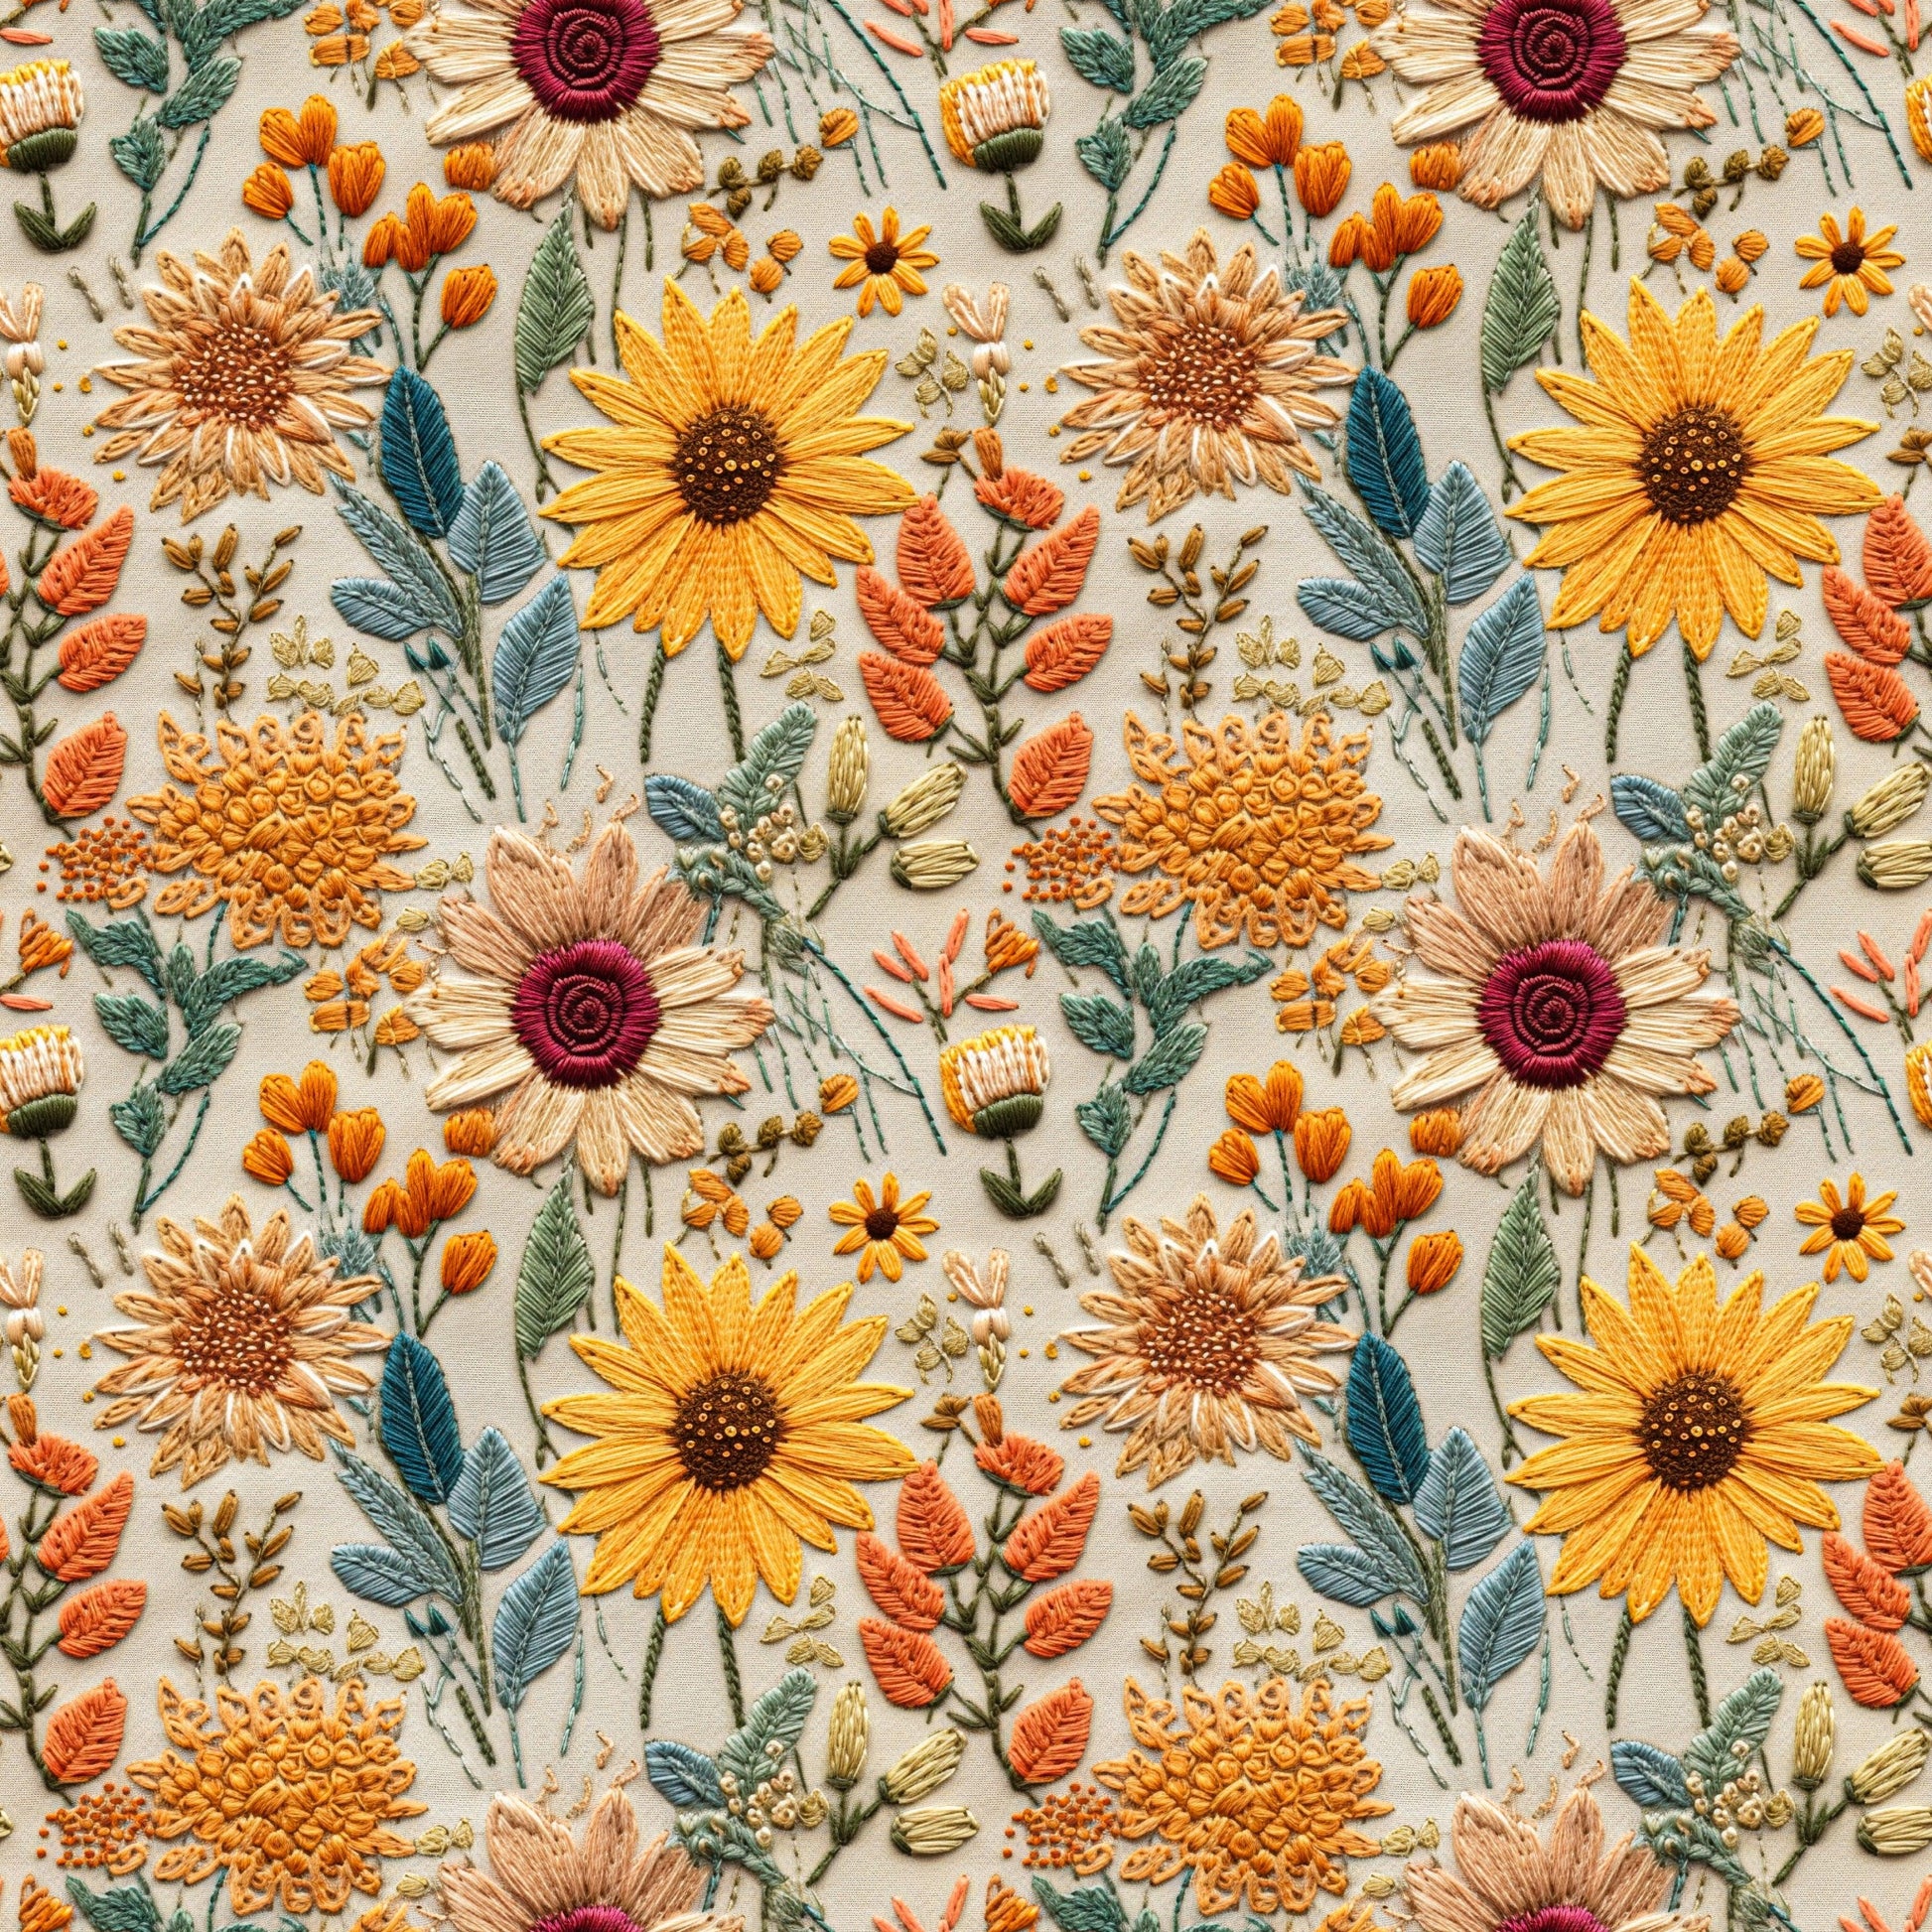 Embroidered Sunflowers 1 mil PUL Fabric- Made in the USA - Nature's Fabrics